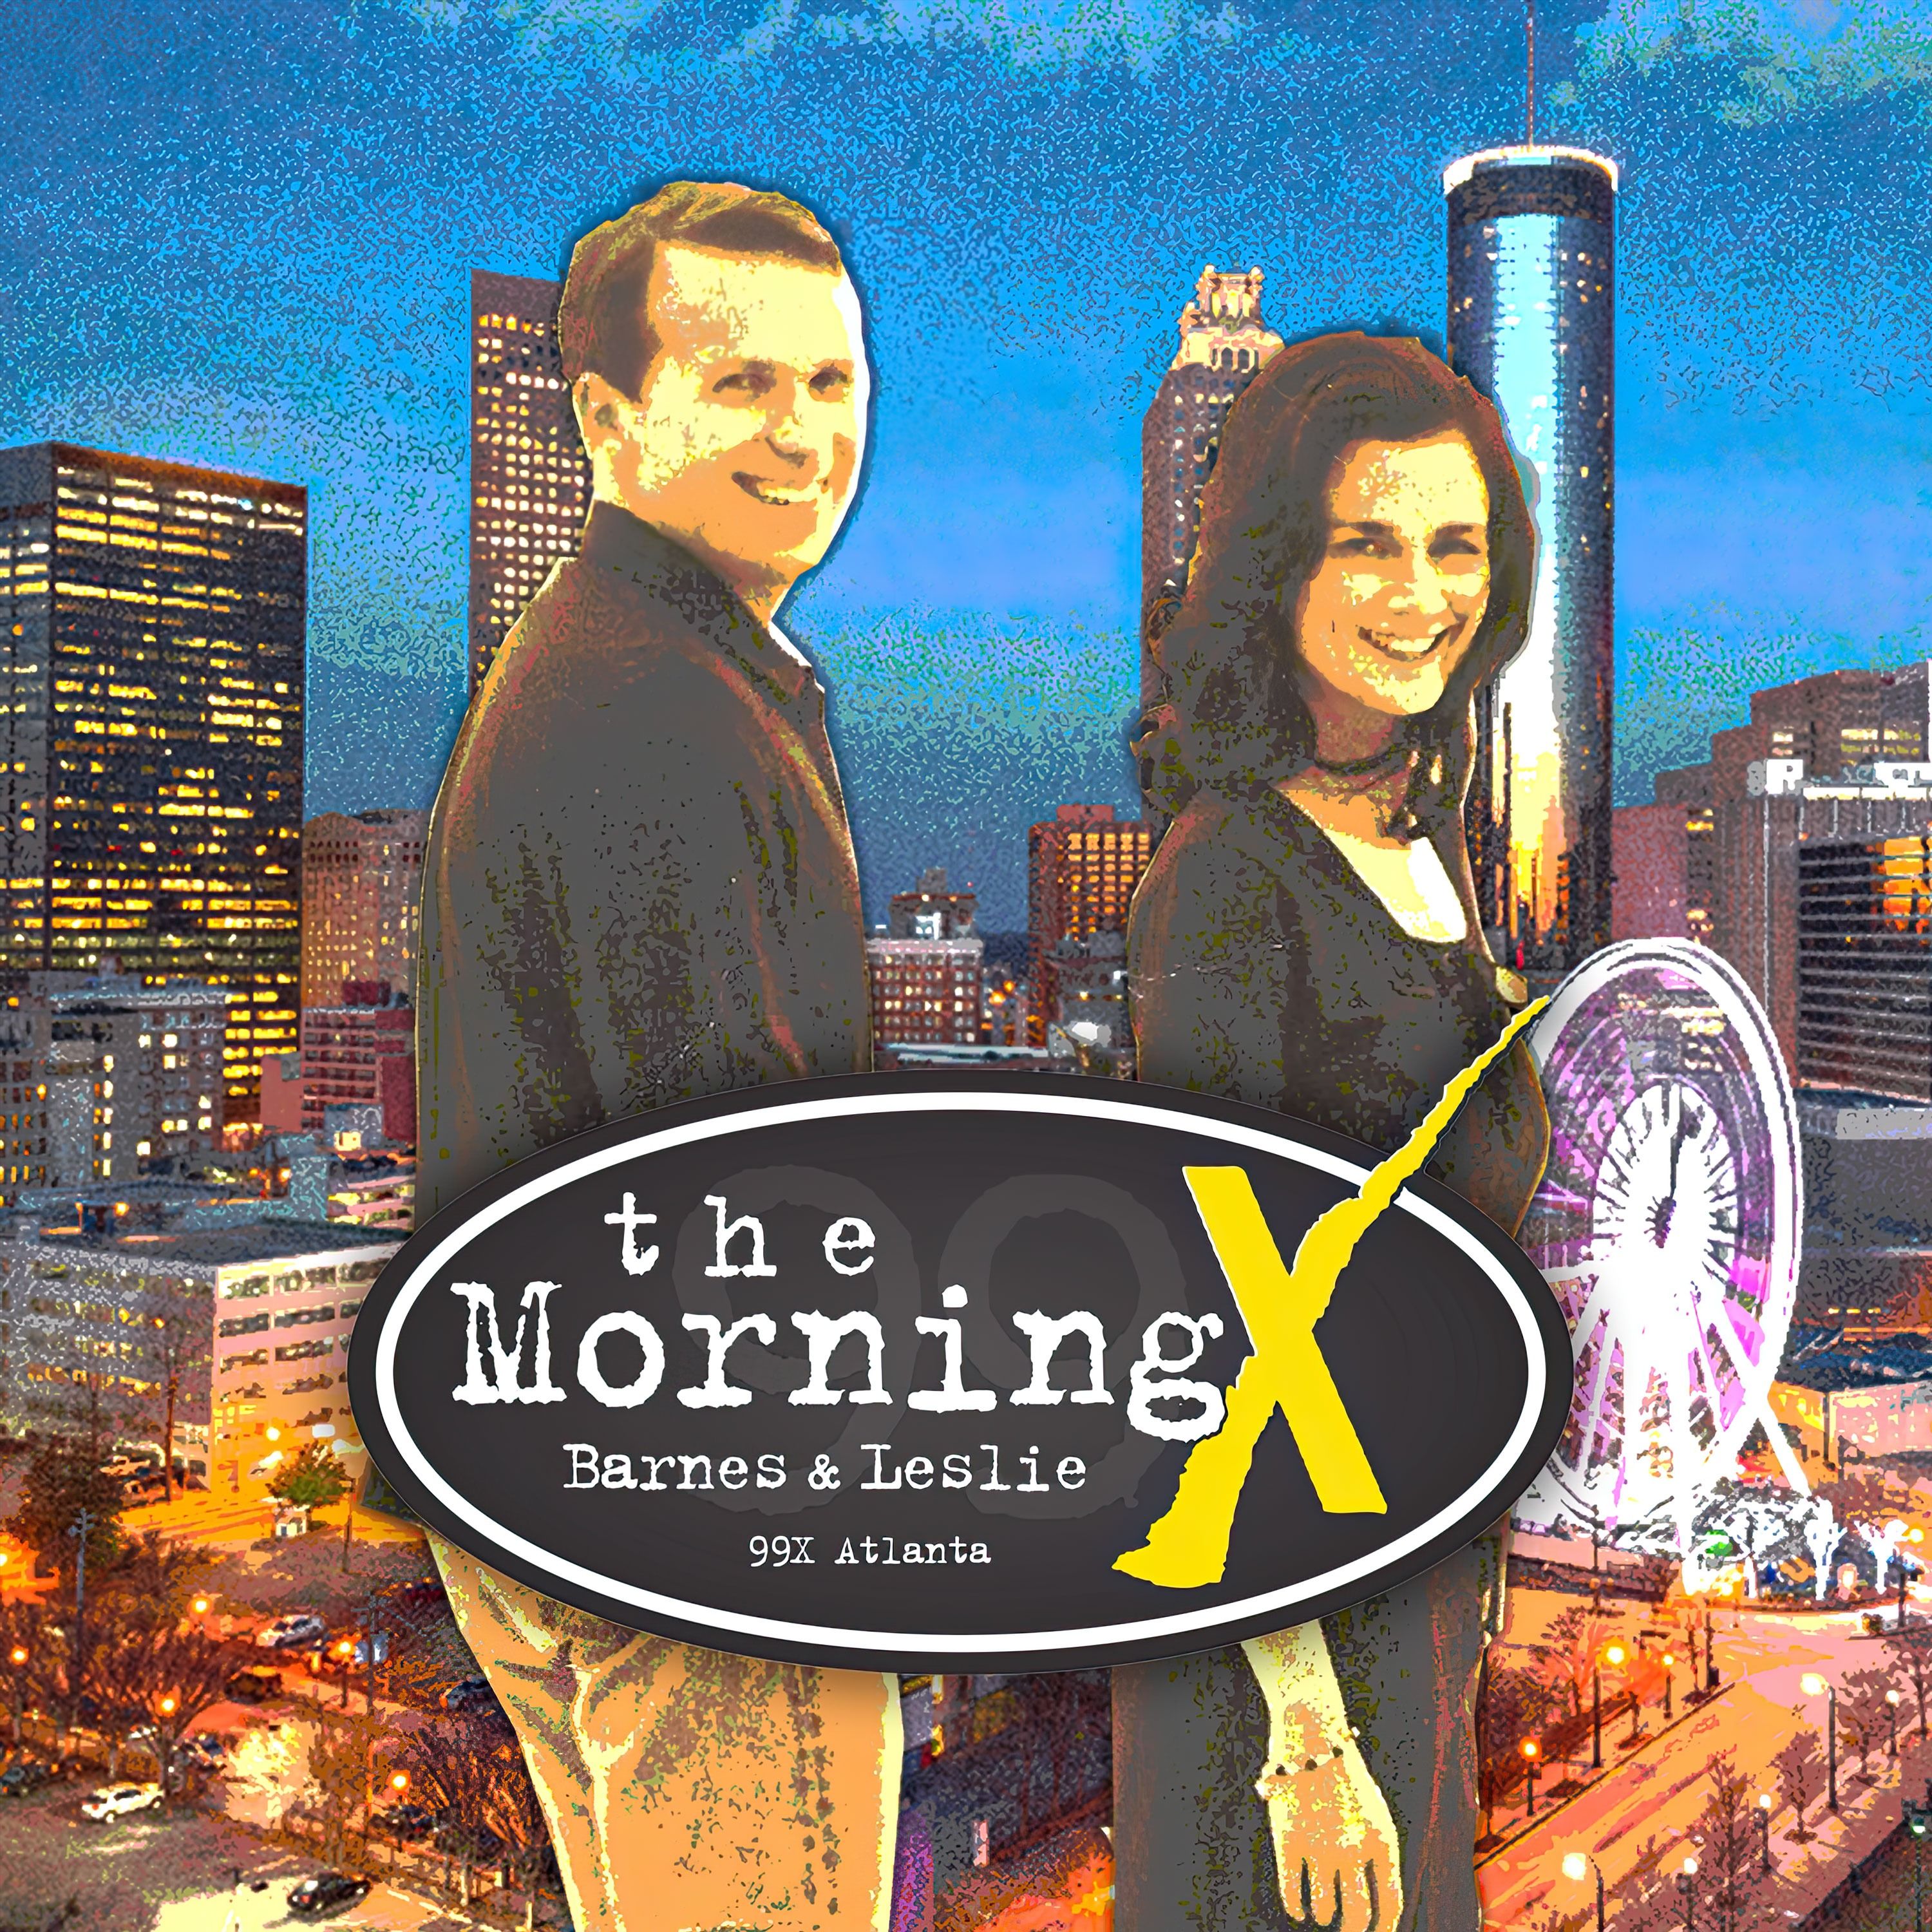 Michael Chiklis Joins The Morning X (INTERVIEW) Part 1